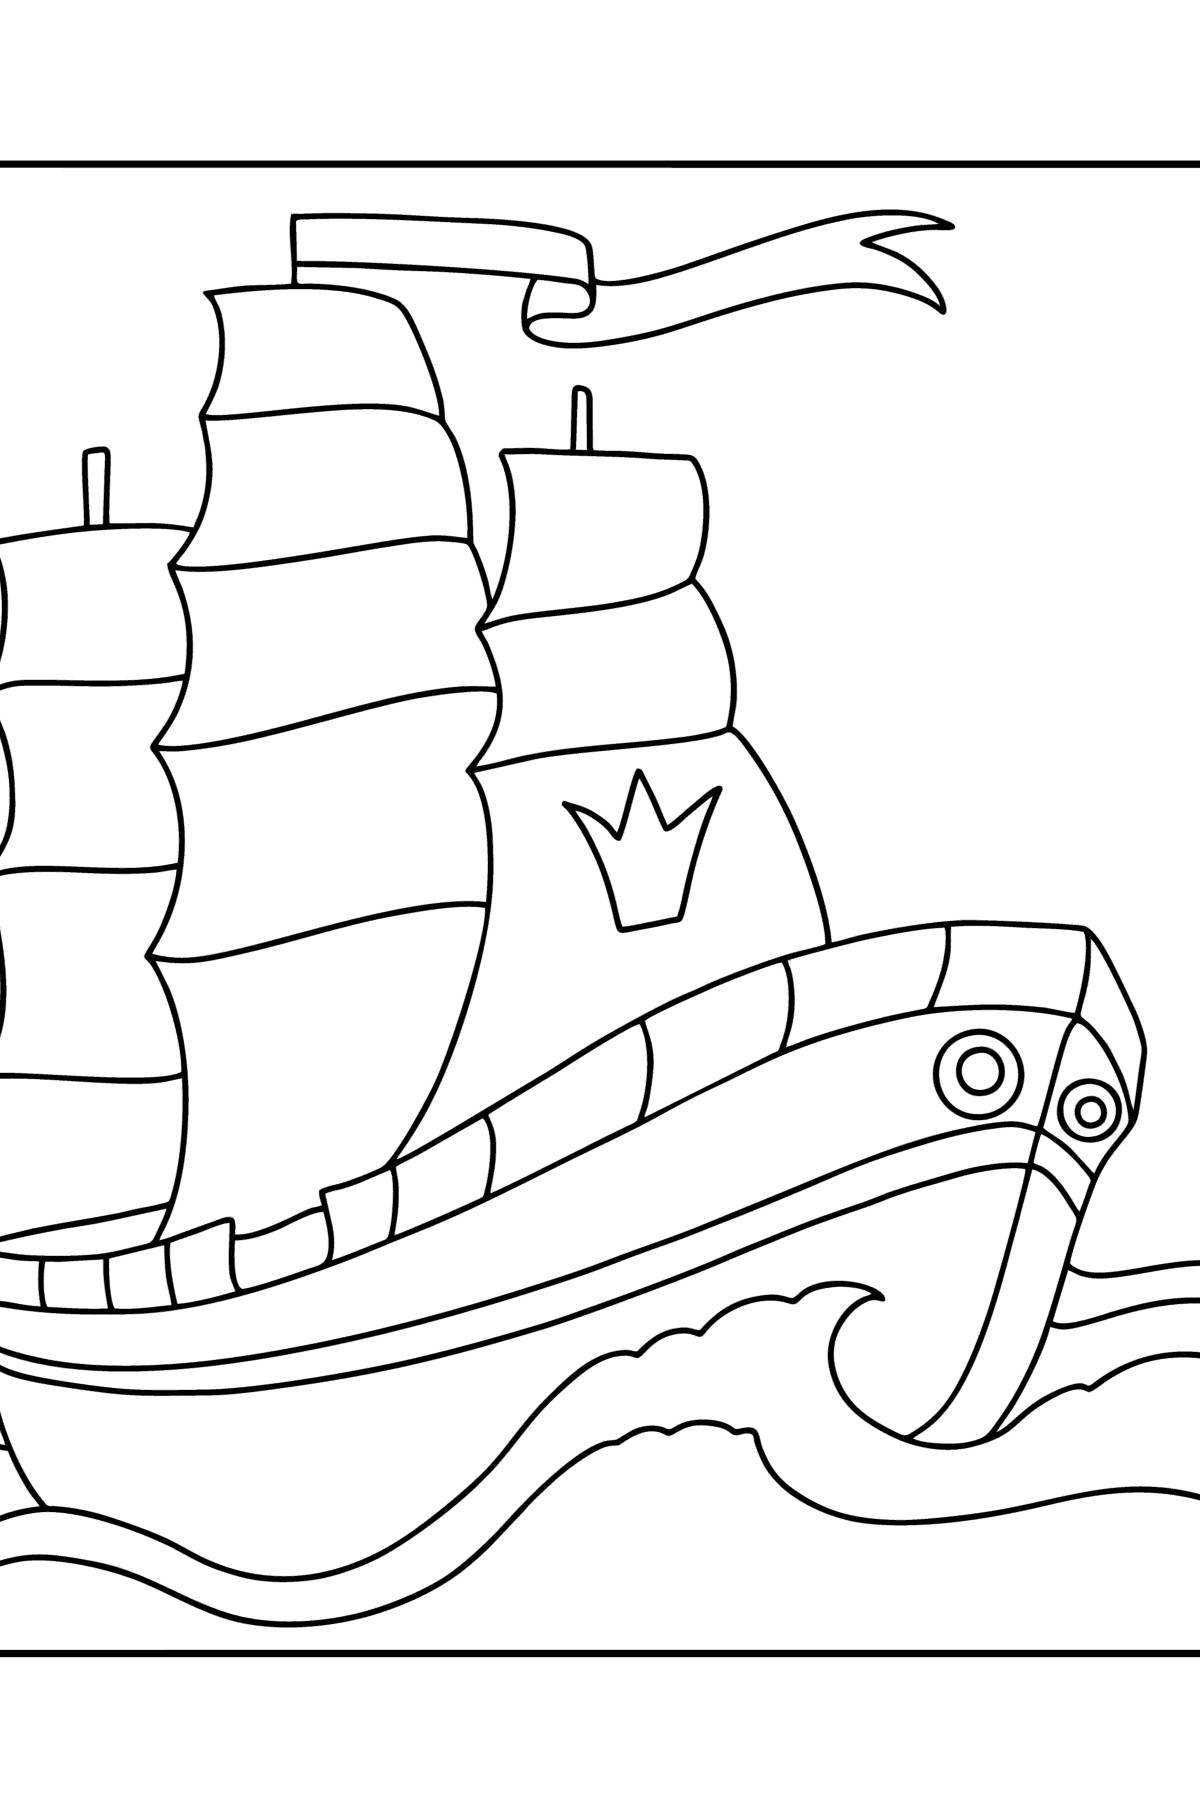 Bright coloring ship with sails